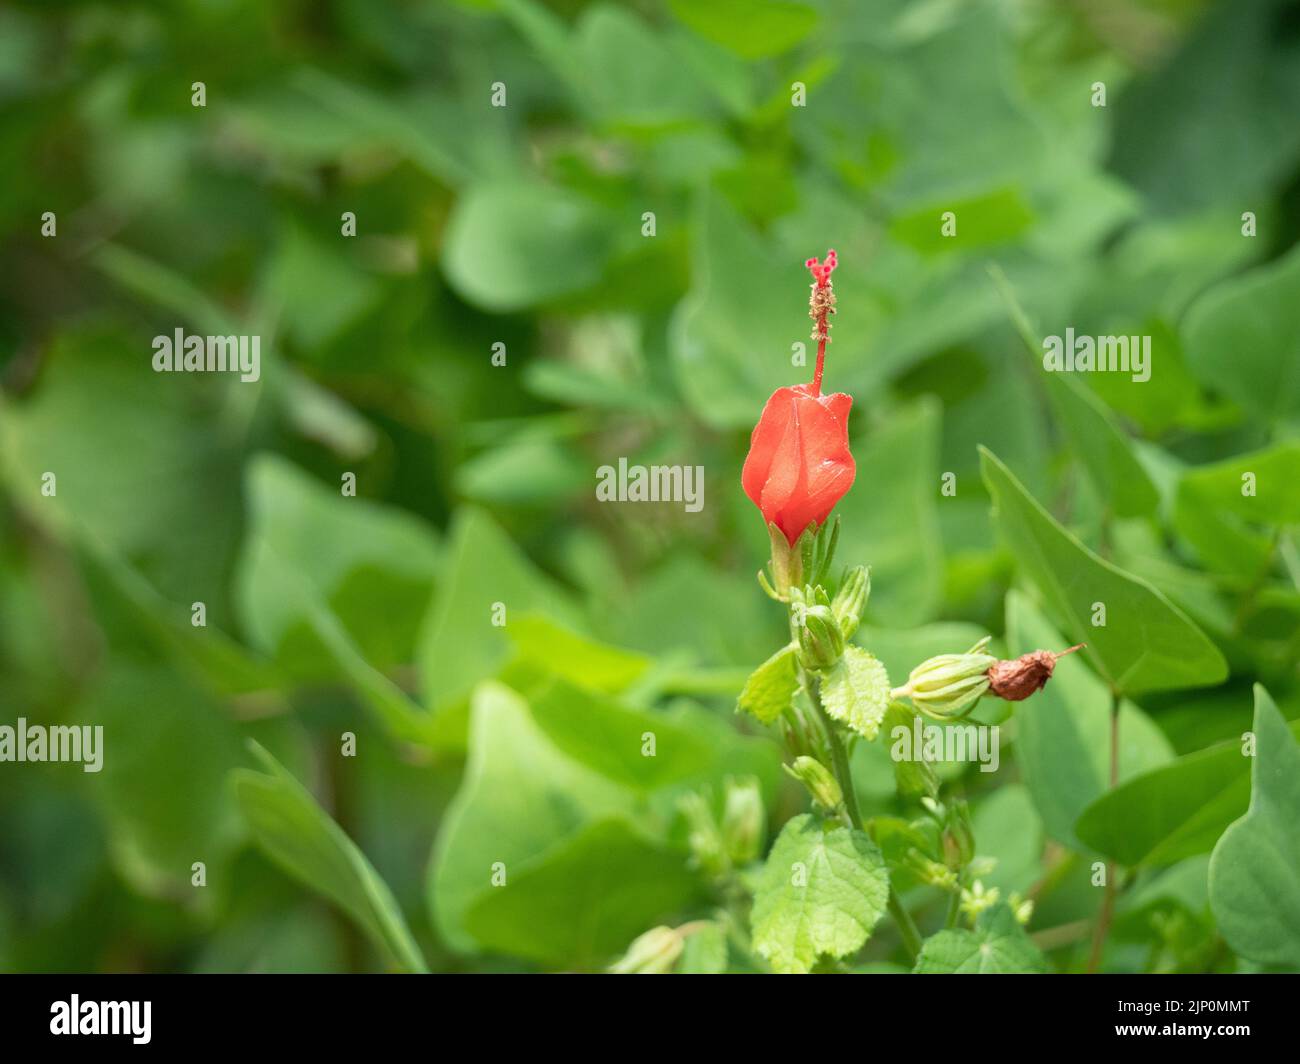 Red Turk's Cap or Malvaviscus arboreus var. drummondii flower in bloom in Texas. Photographed with leaves in background with shallow depth of field. Stock Photo